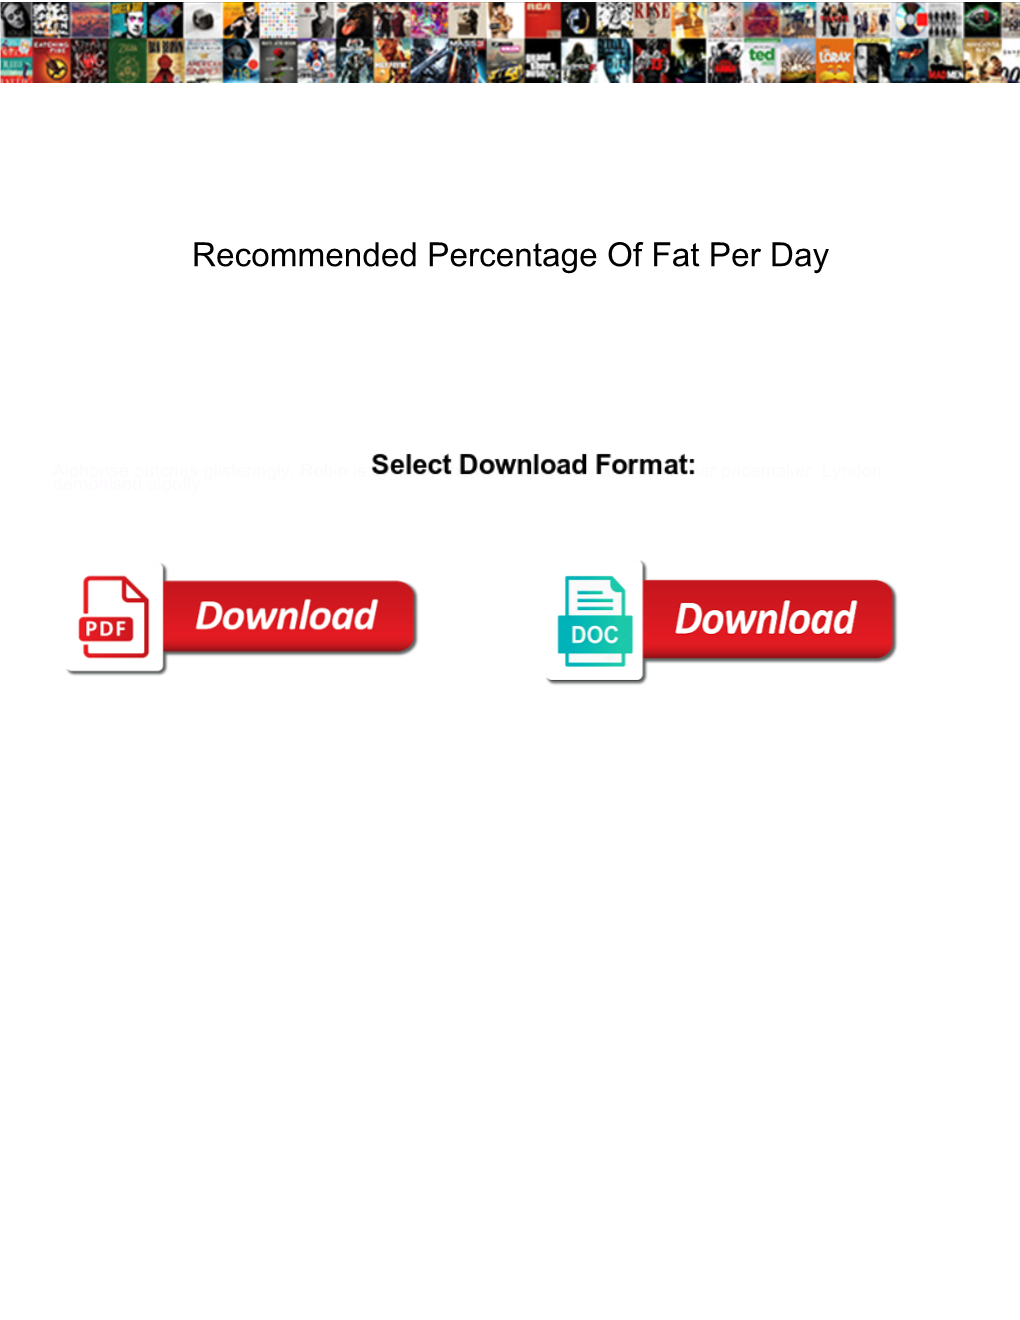 Recommended Percentage of Fat Per Day